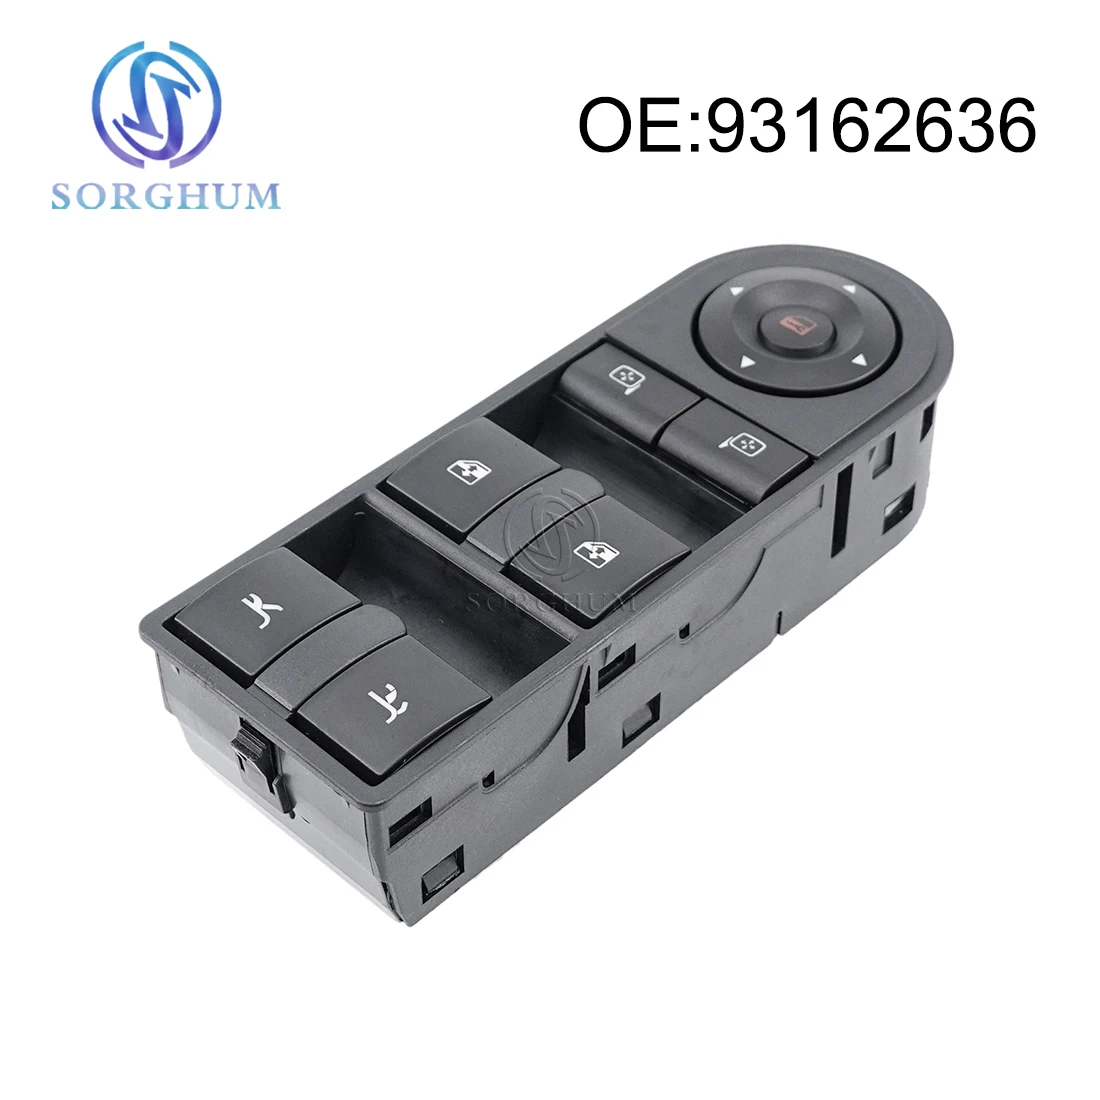 

Sorghum Electric Master Power Window Control Switch Console Regulator 93162636 For Vauxhall For Opel Tigra Twintop 2004-2016